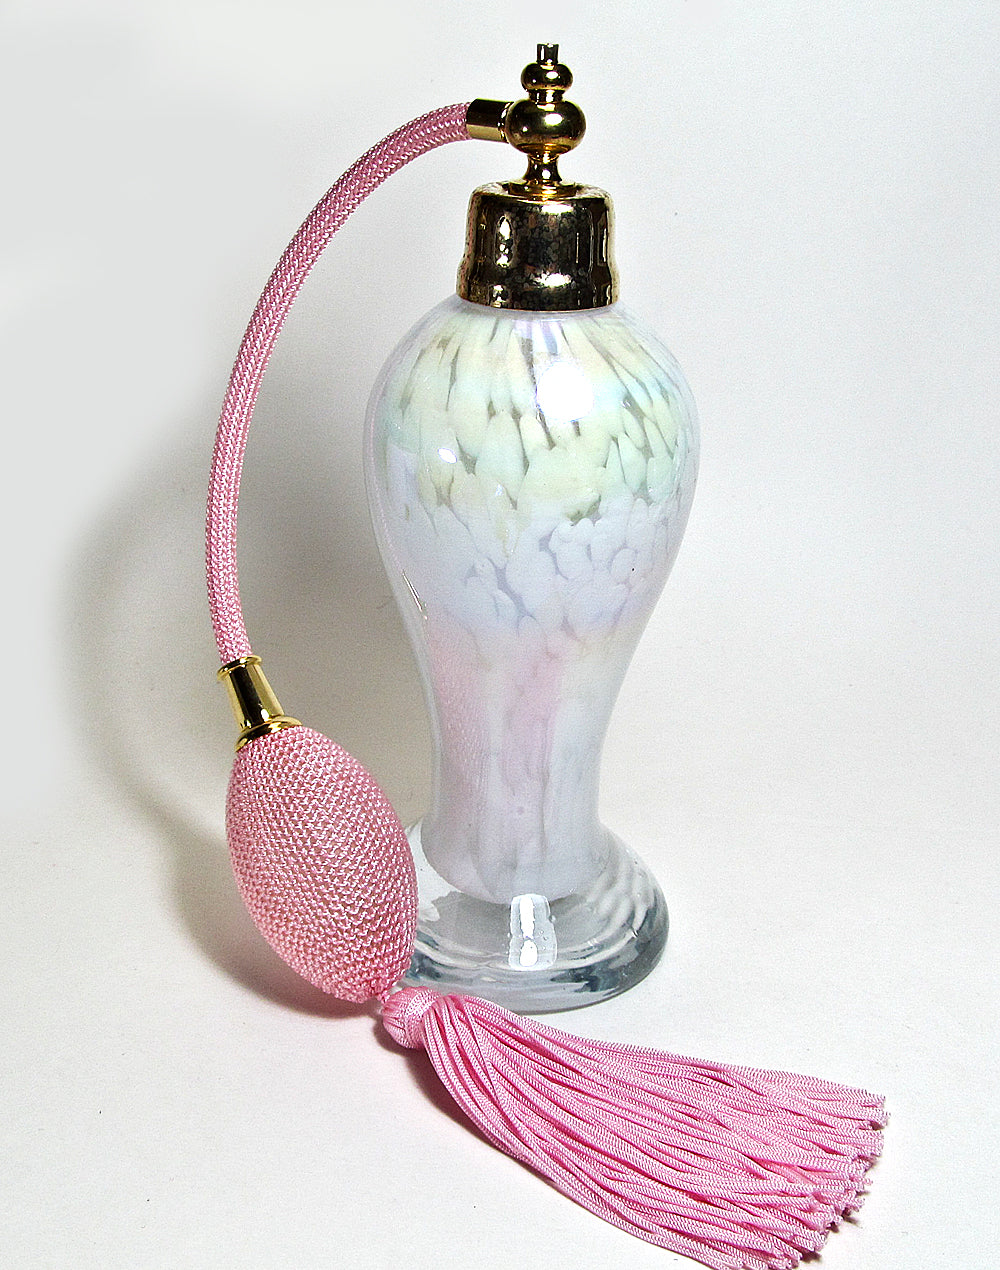 Art made with hand perfume bottle with pink bulb and tassel spray mounting.